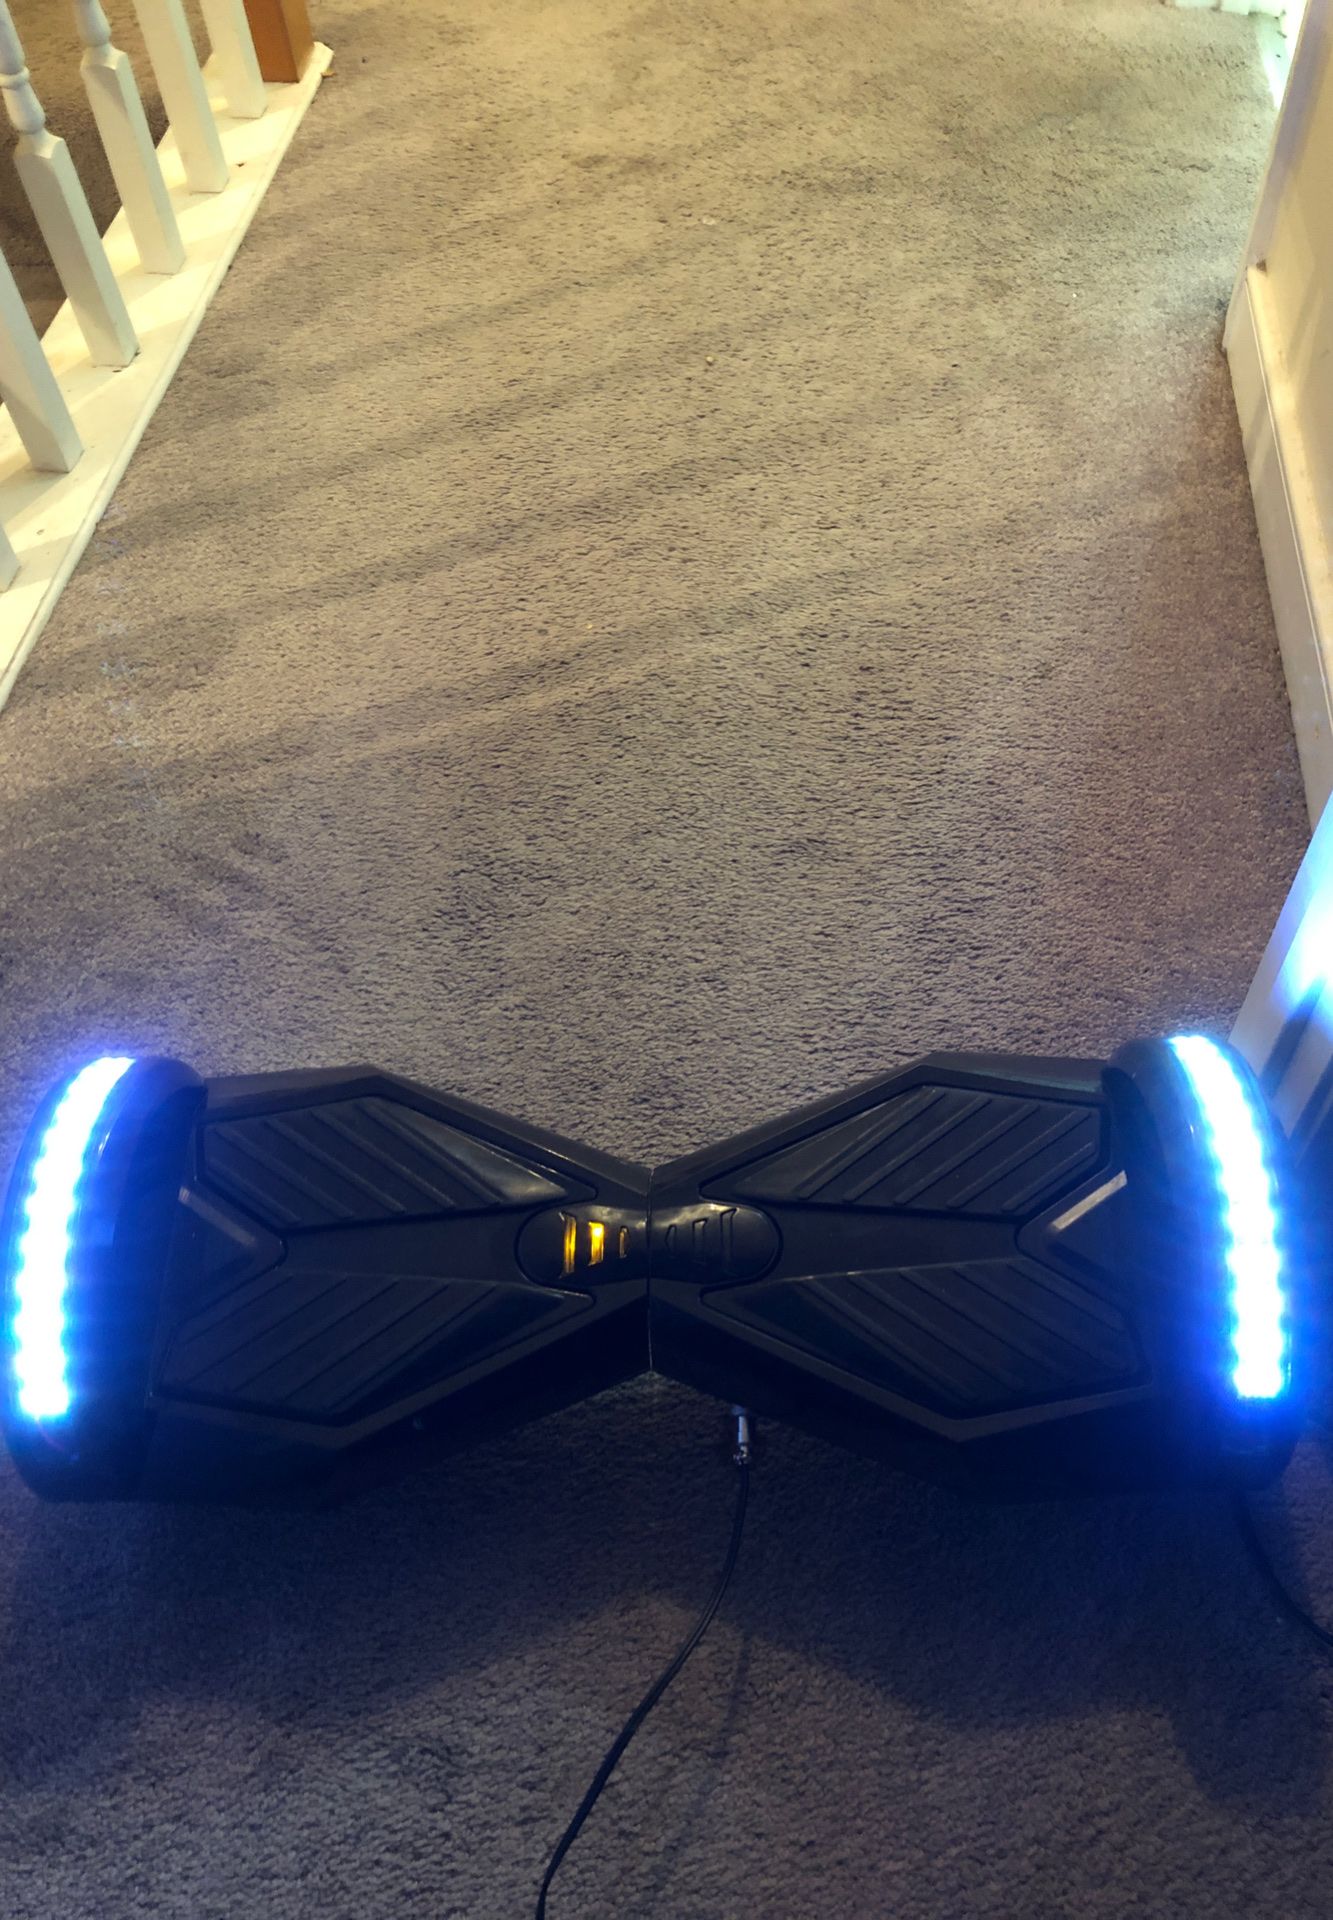 Lamborghini hoverboard. With Bluetooth for sale for $200.